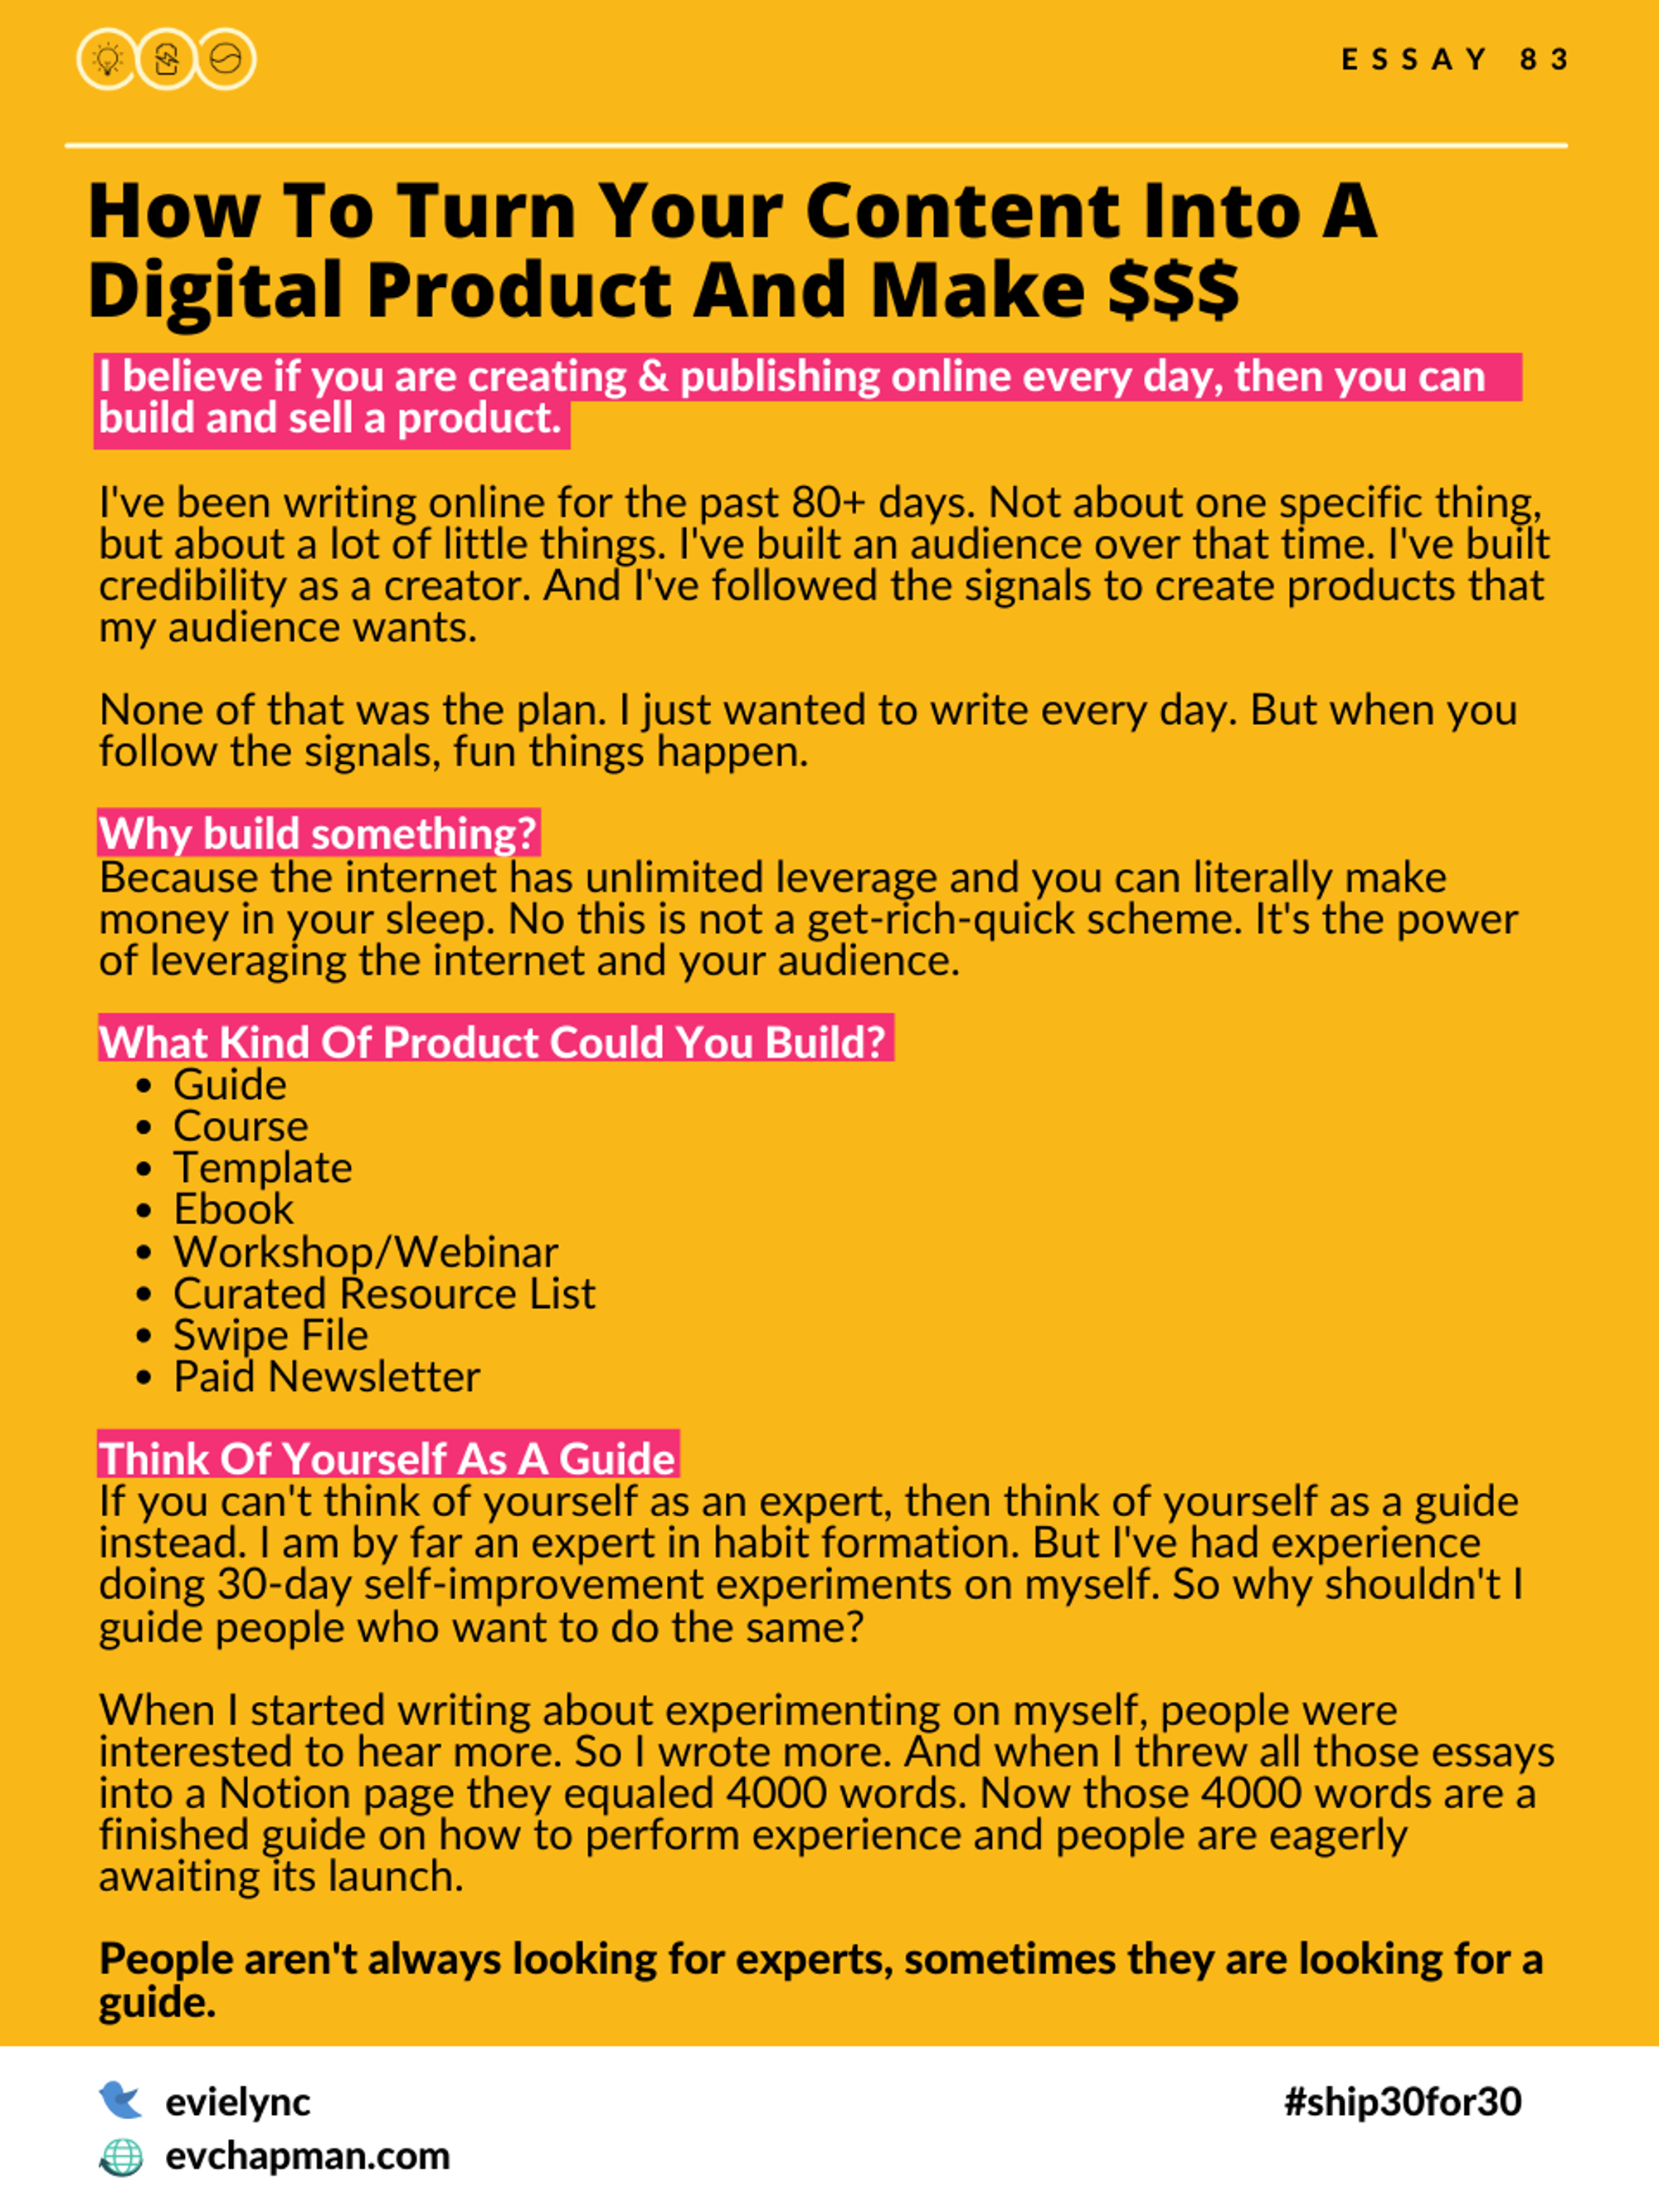 How To Turn Your Content Into A Digital Product And Make $$$